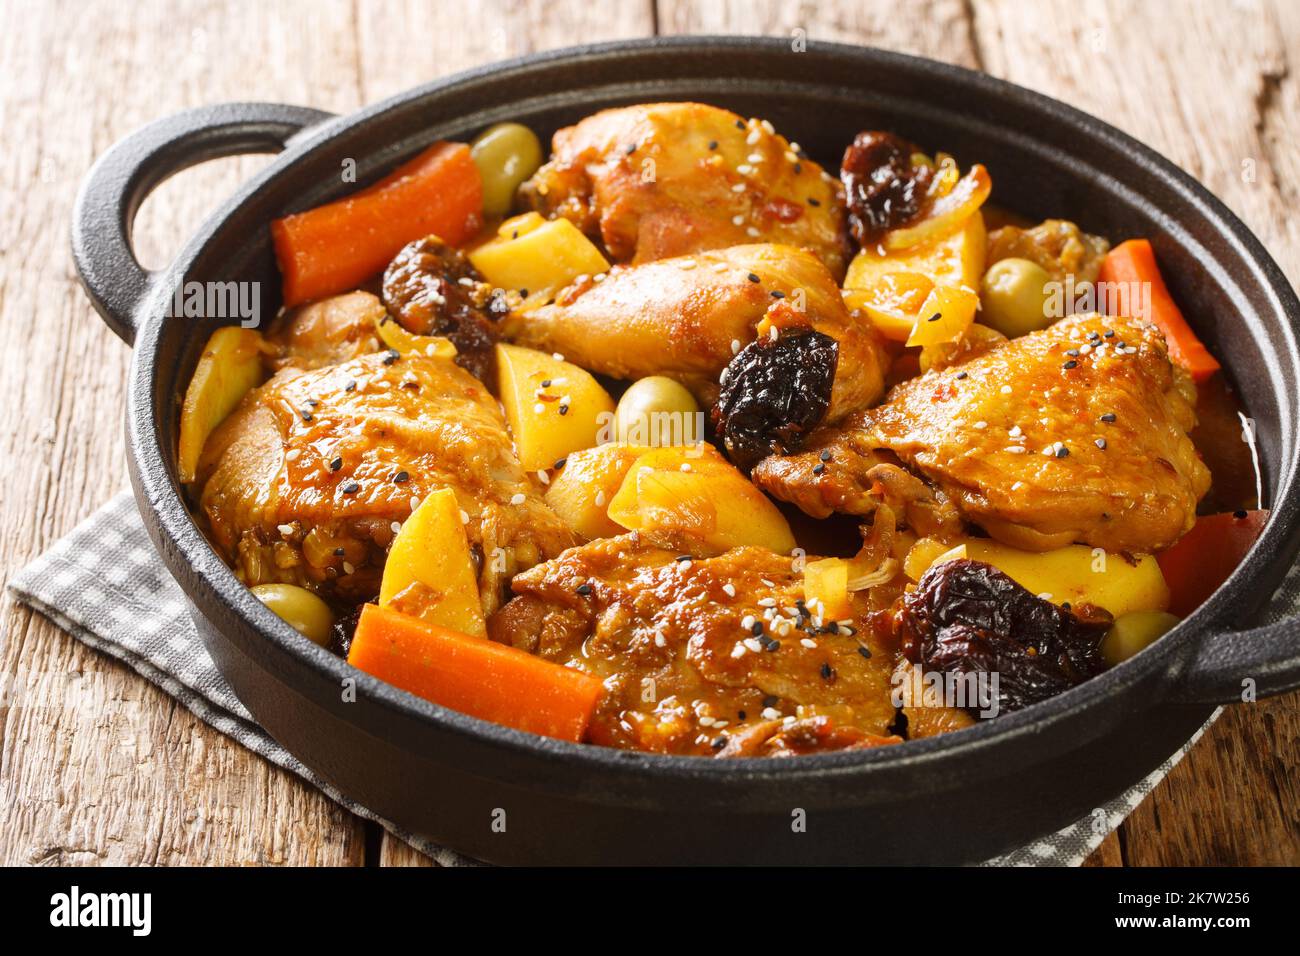 Gallo en chicha stew with chicken, prunes, vegetables, and spices cooked to have a wonderful flavor and aroma closeup on the pan on the wooden table. Stock Photo